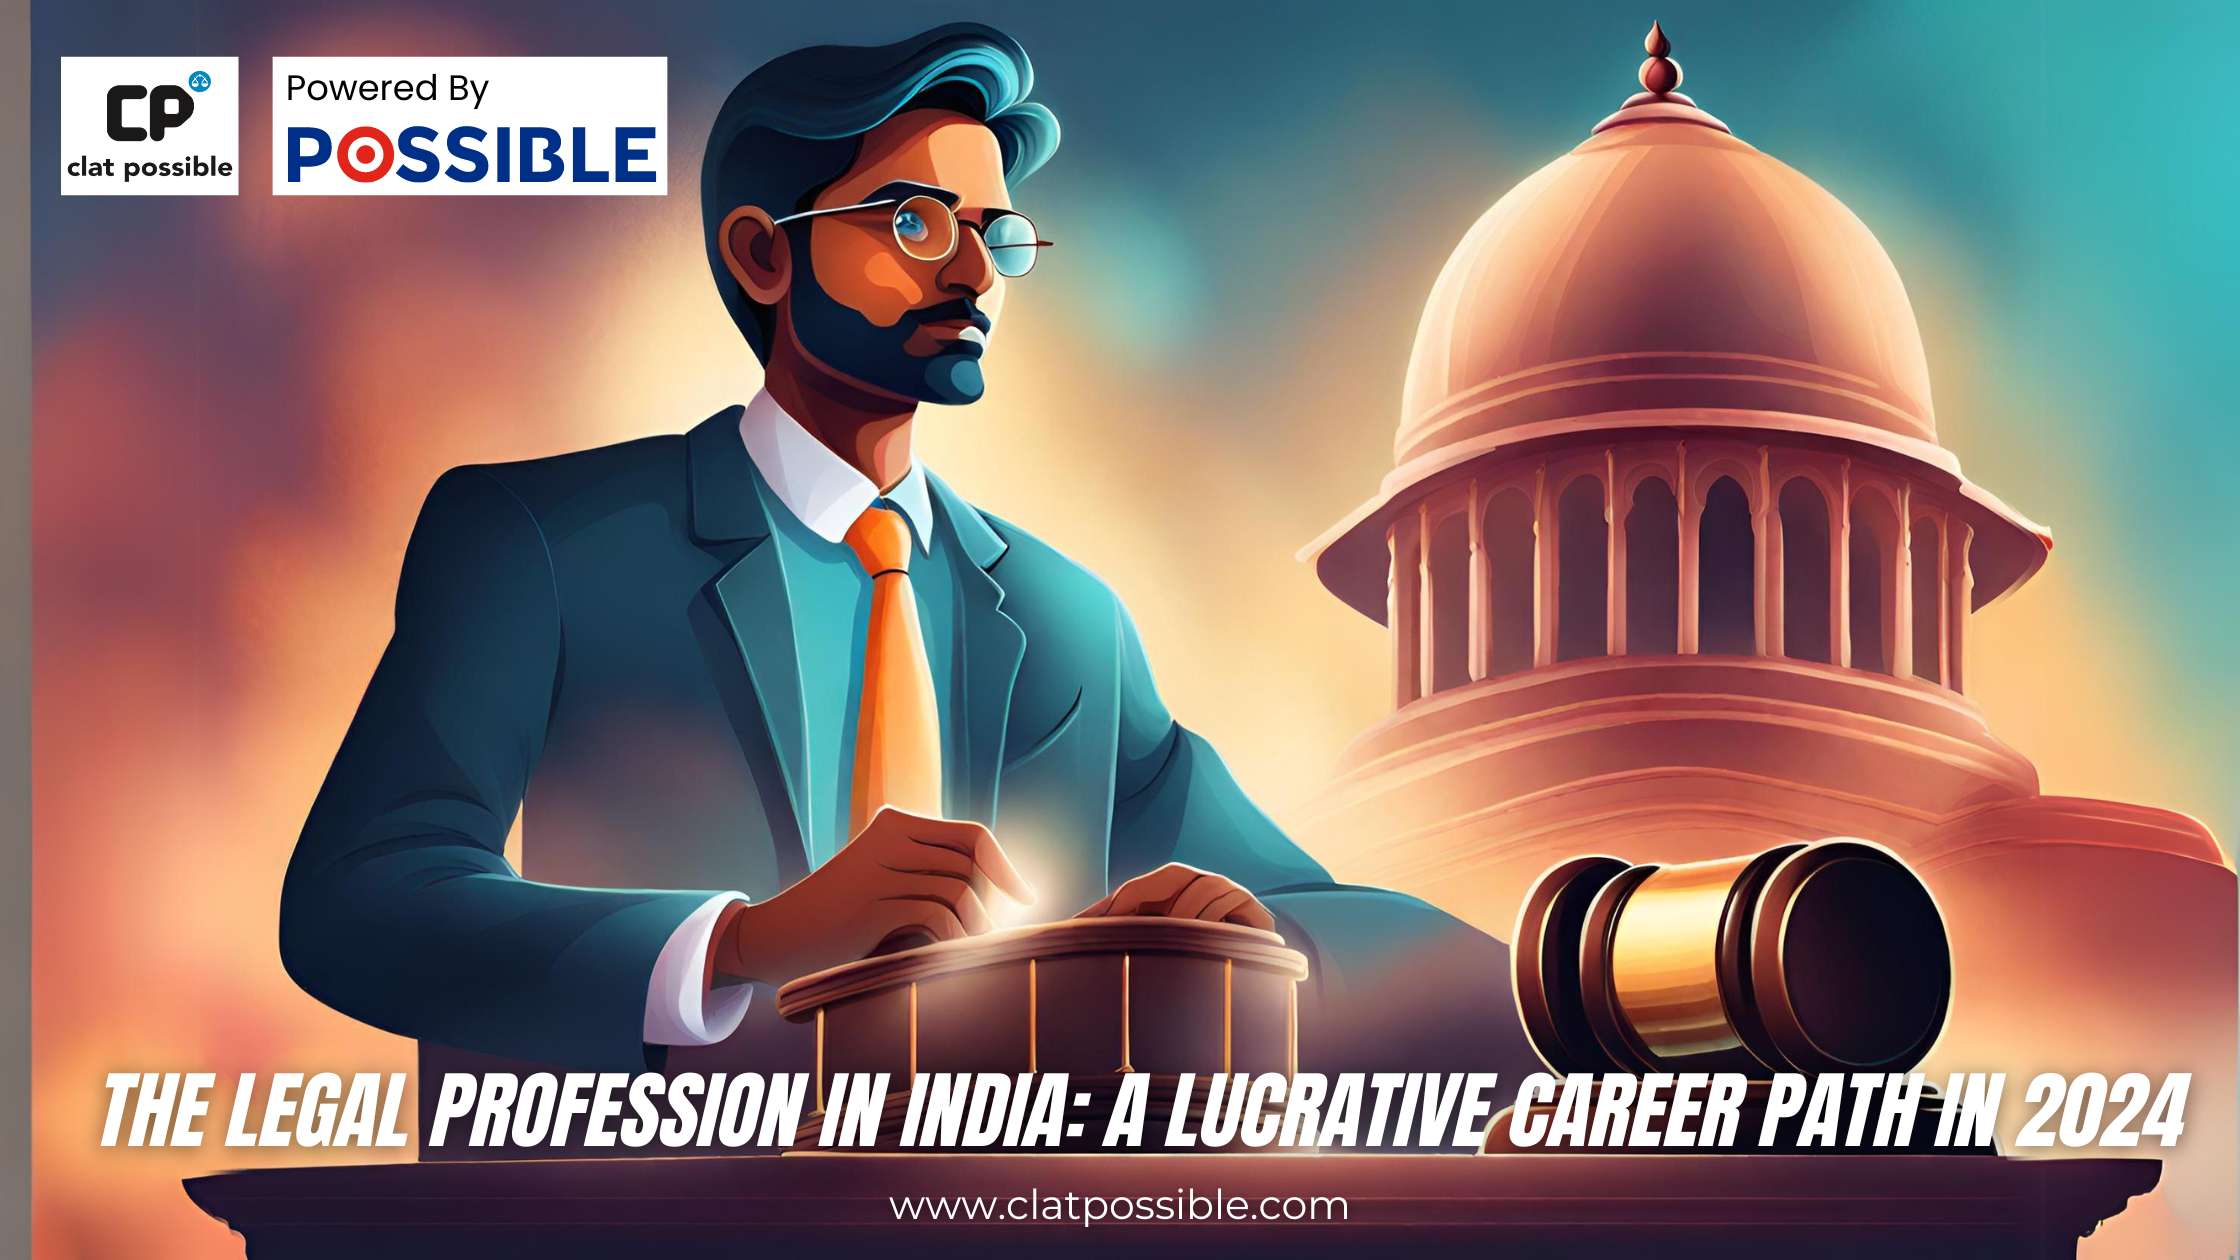 The Legal Profession in India: A Lucrative Career Path in 2024